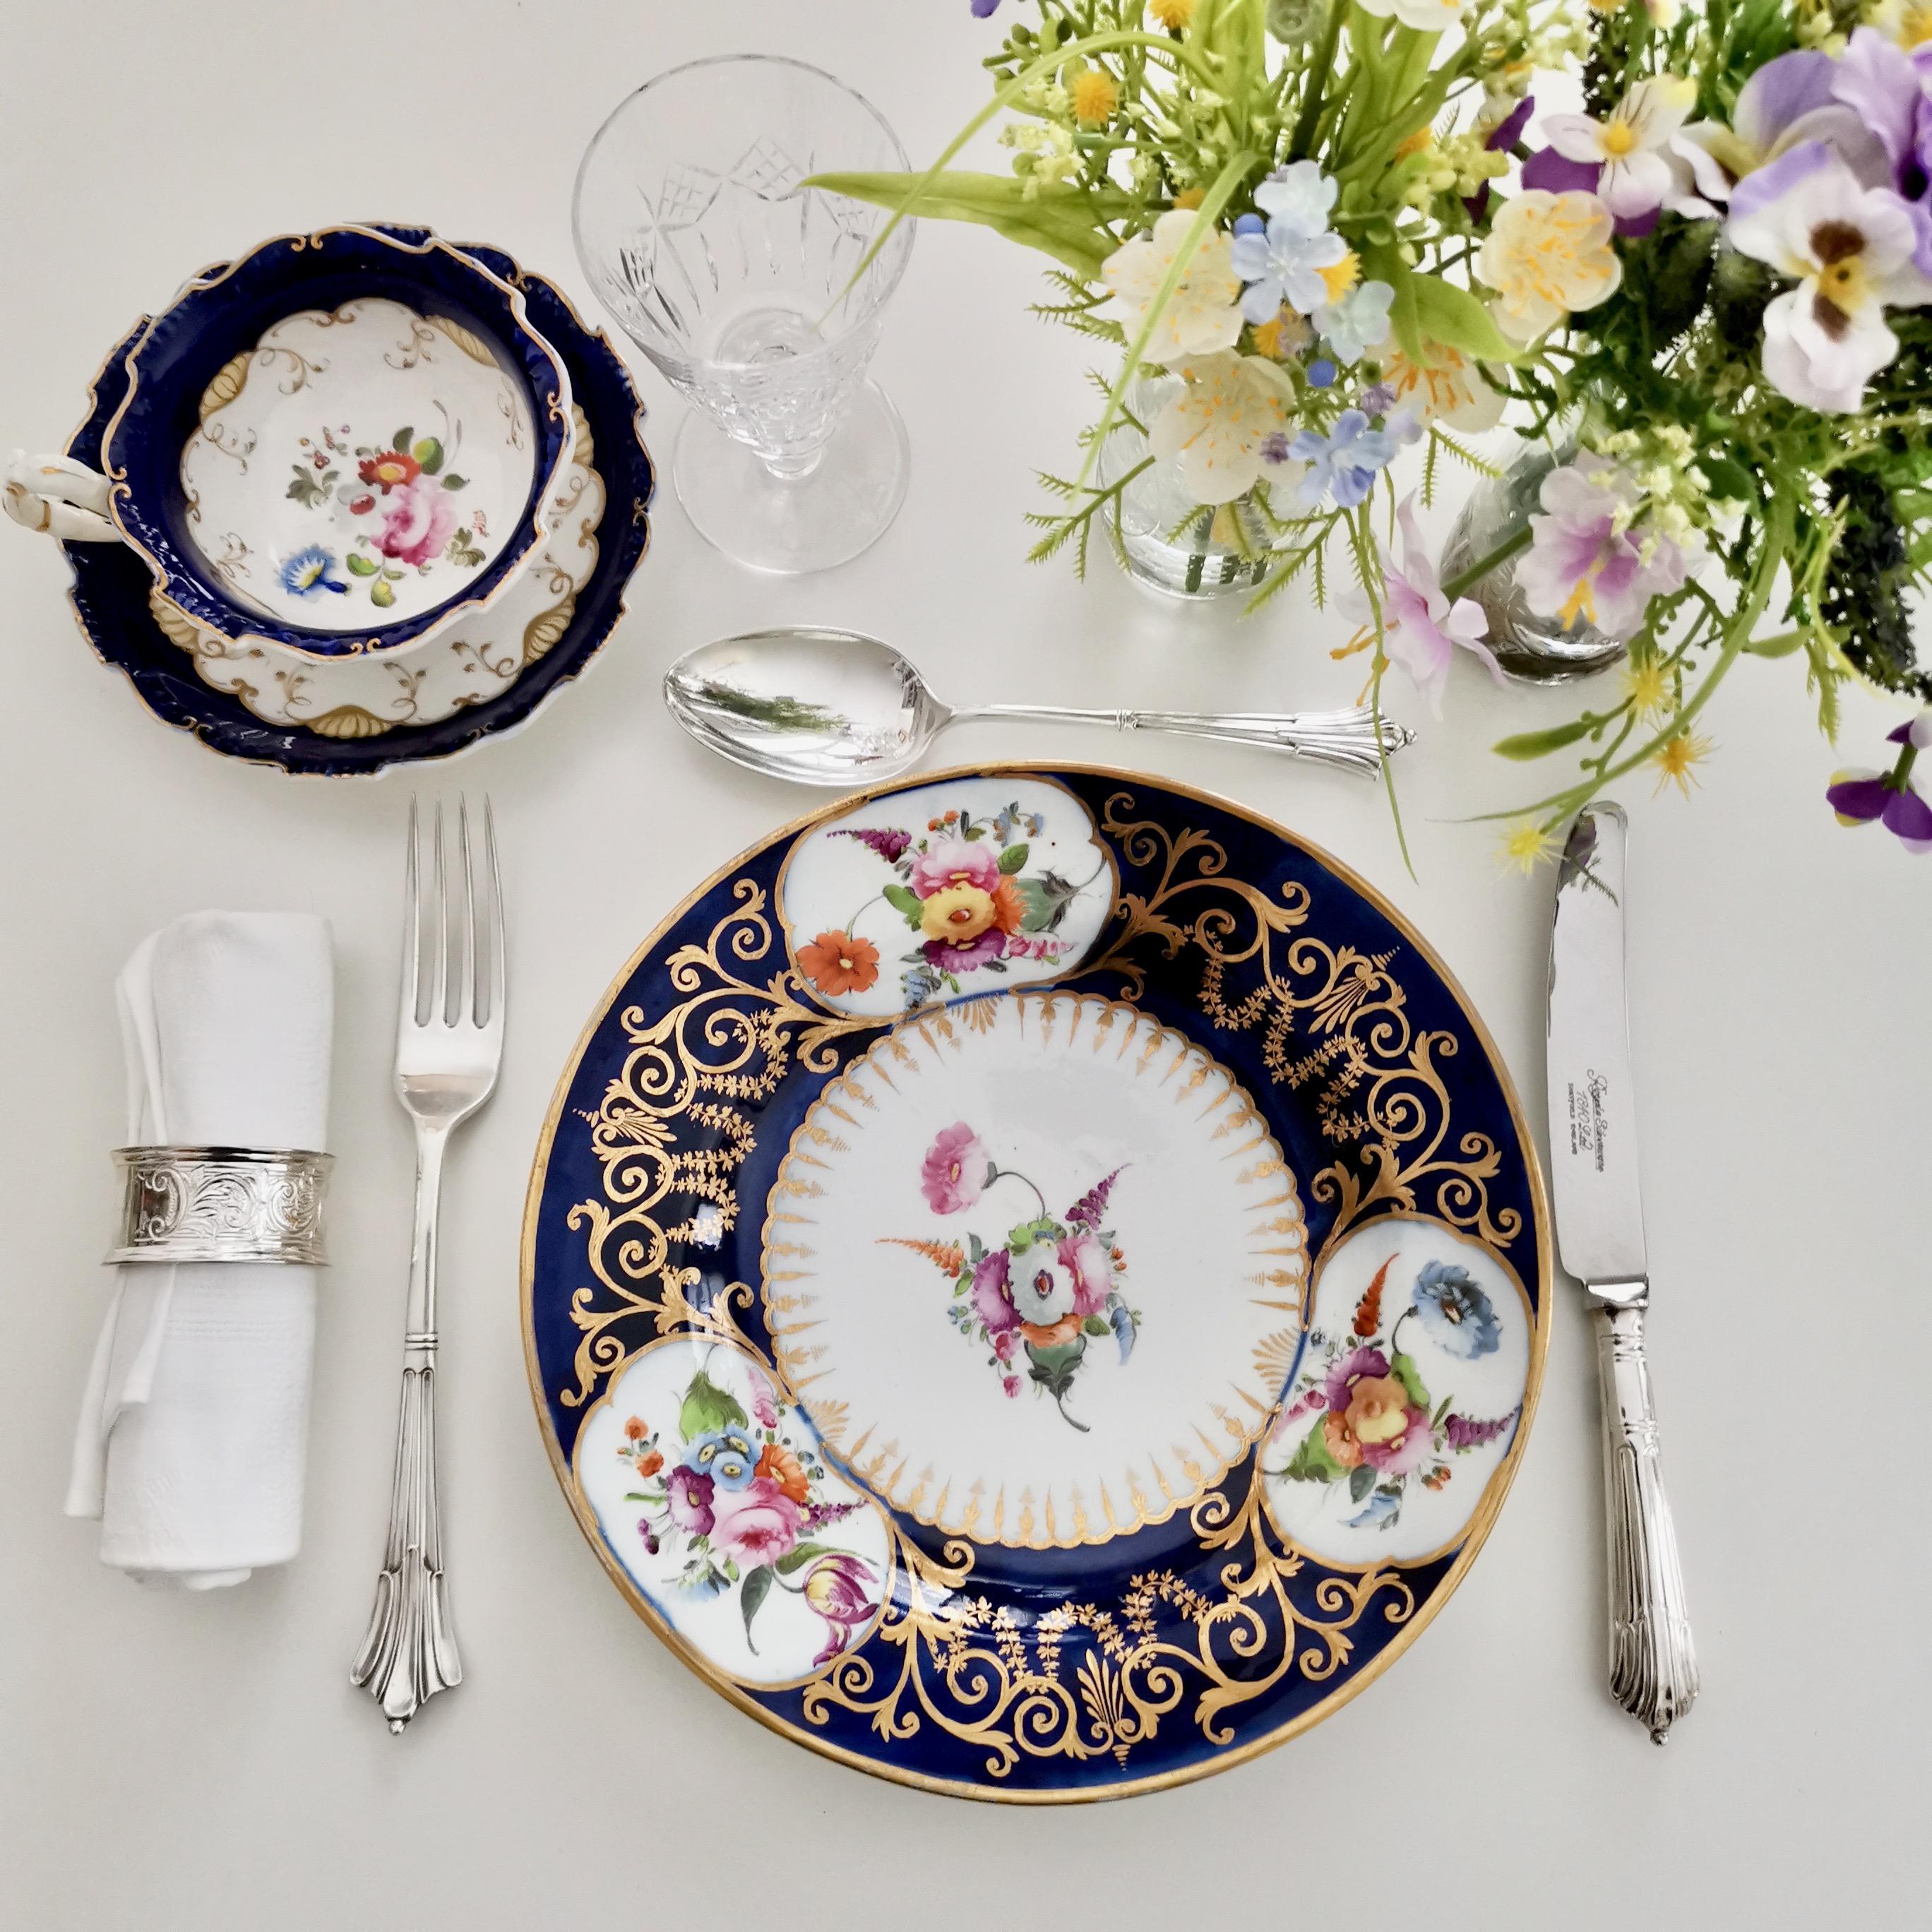 This is a very beautiful plate made by John Rose in Coalport in circa 1805 or 1810, which was the Georgian era. The plate has a beautiful cobalt blue ground, rich gilding and elegant hand painted floral reserves.

Coalport was one of the leading